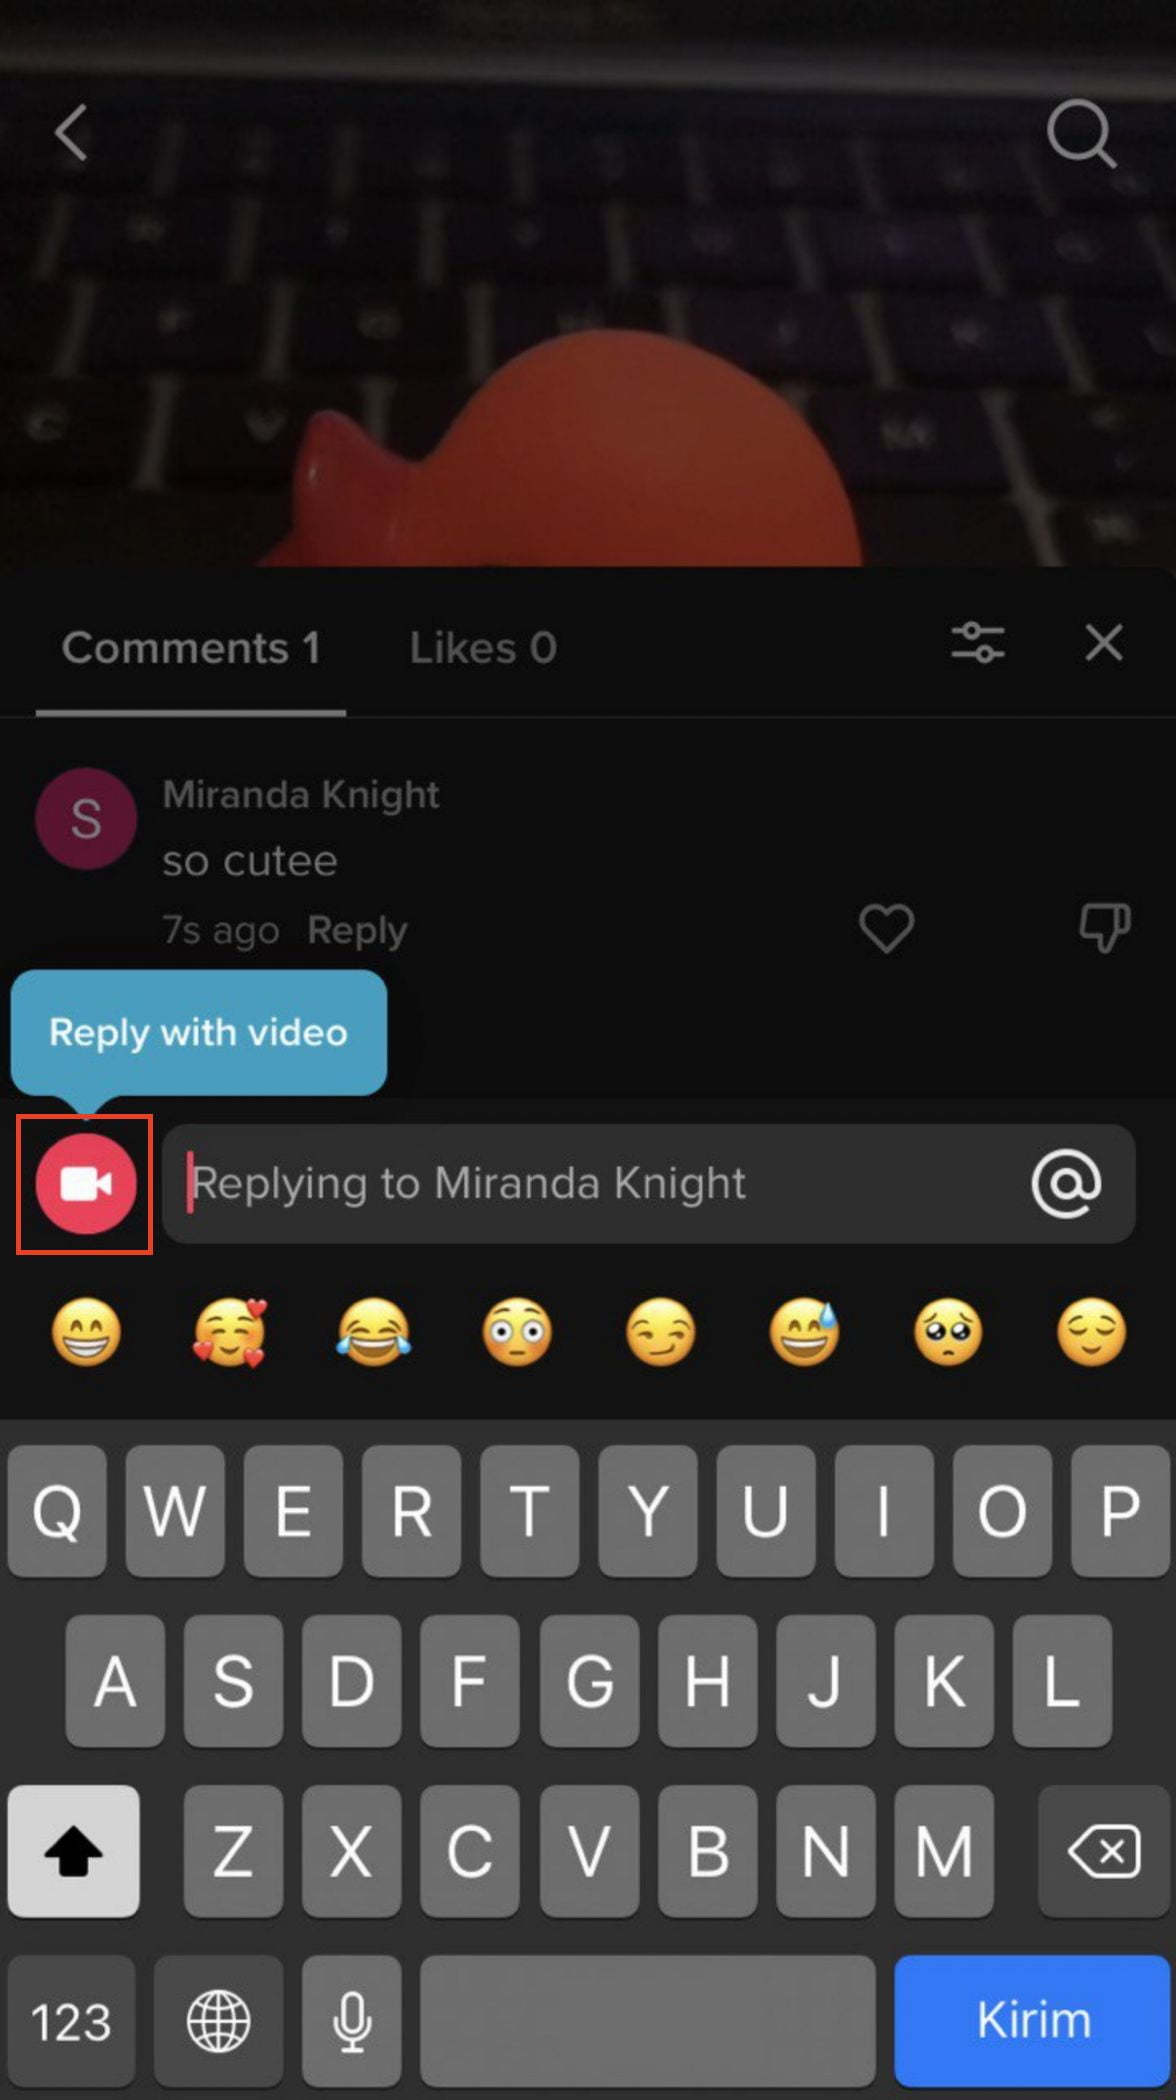 How to Reply With a Video in TikTok using iPhone